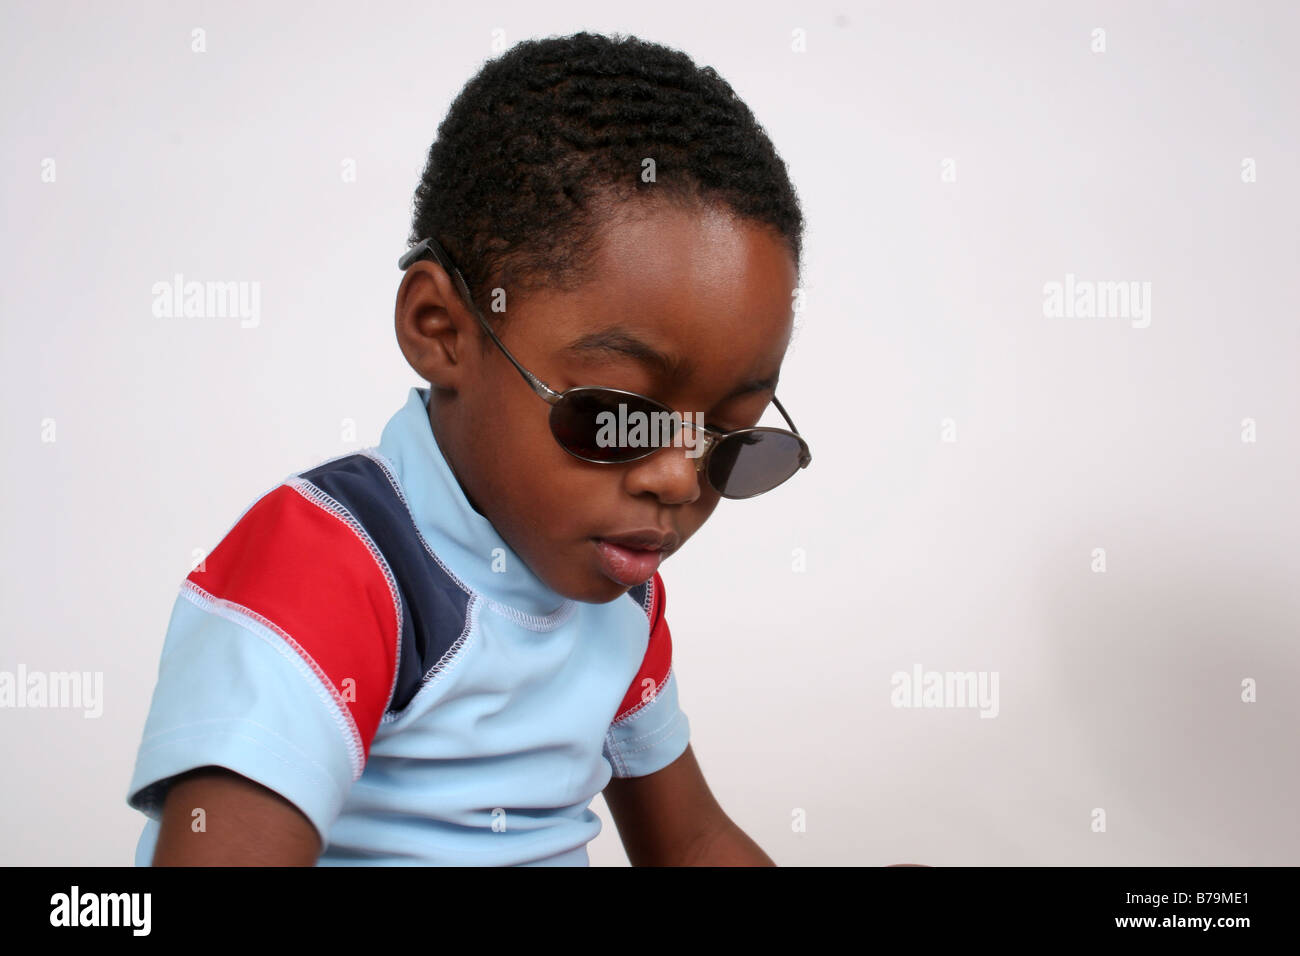 African American boy  with sunglasses on Stock Photo